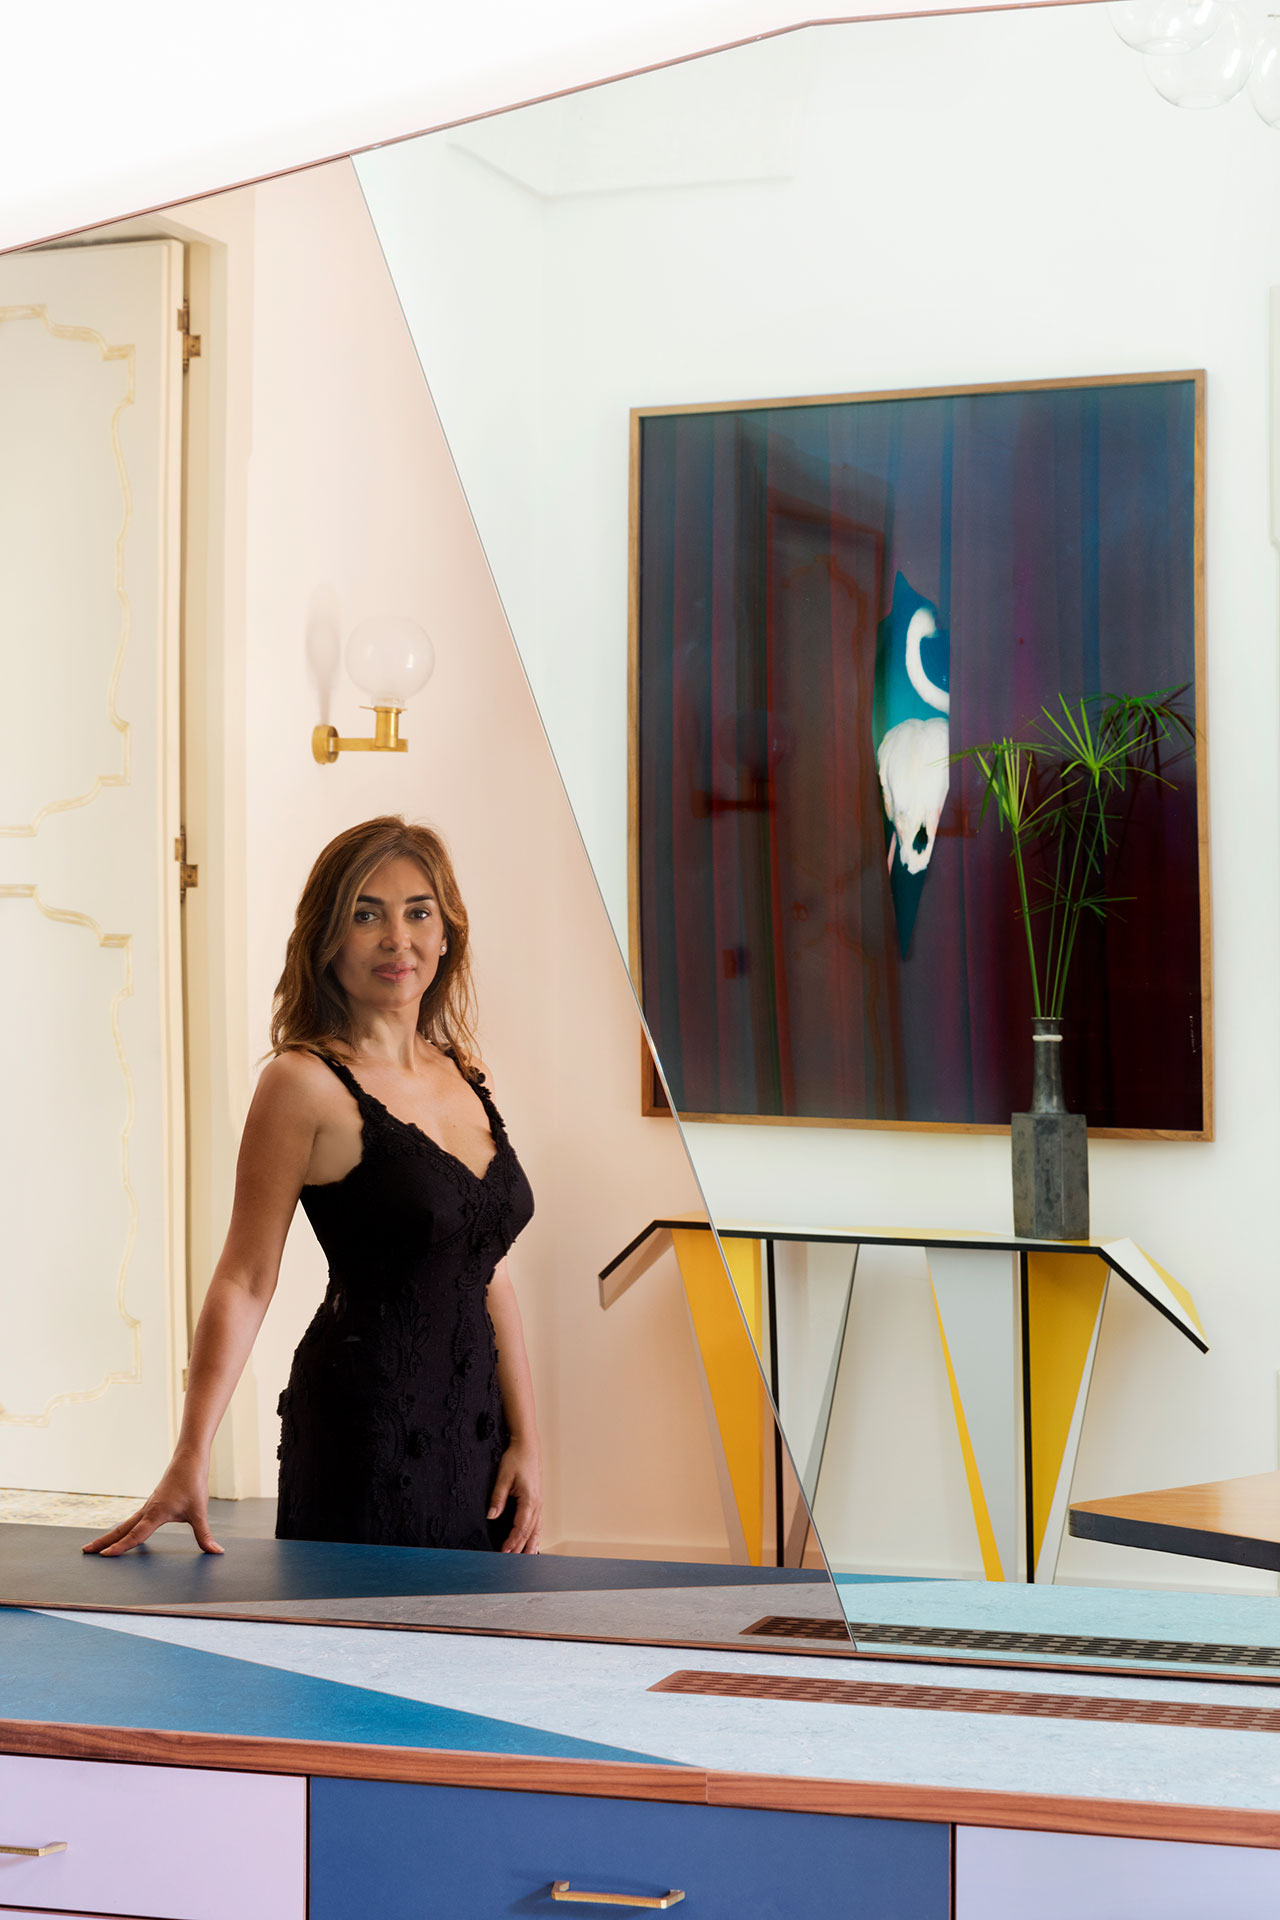 Collector Anna Maria Enselmi at Palazzo Luce. Photography by Helenio Barbetta.